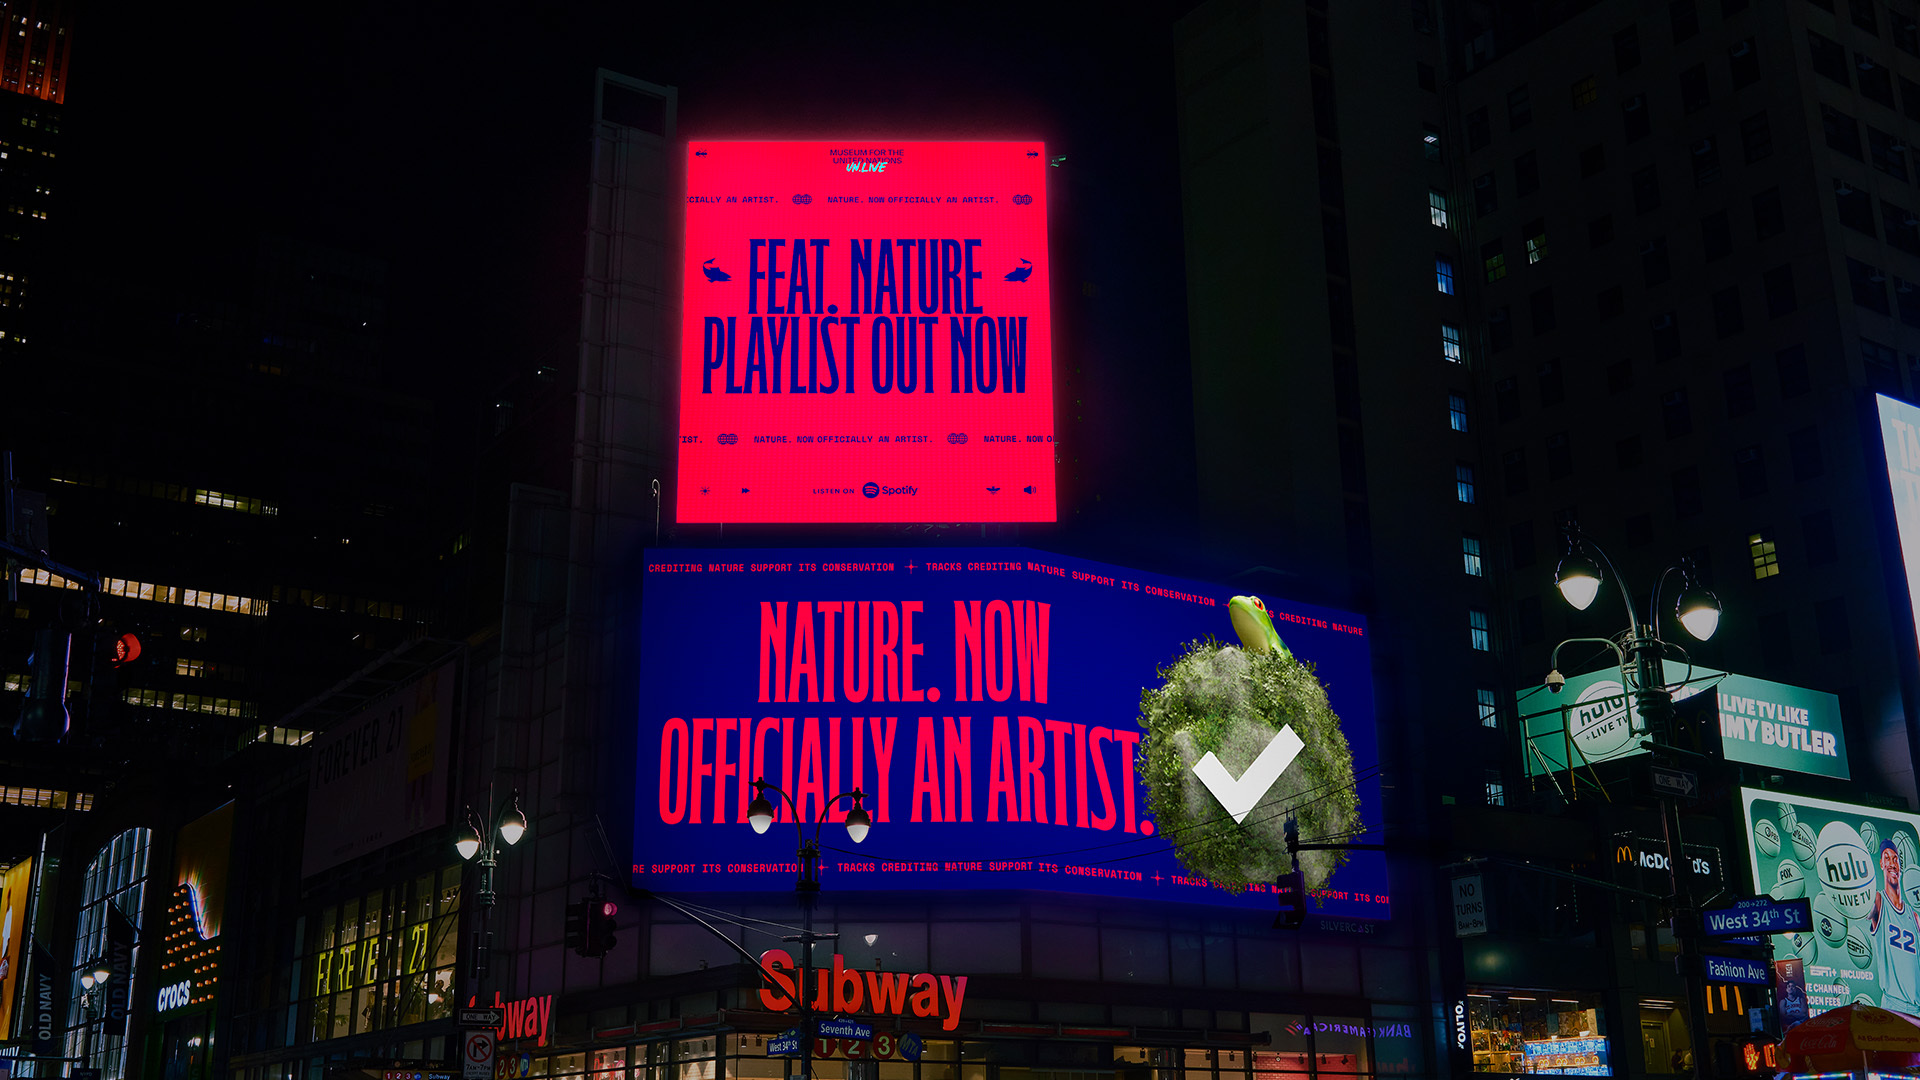 In a new initiative aimed at raising funds for global conservation efforts, nature now has its own artist page on Spotify.